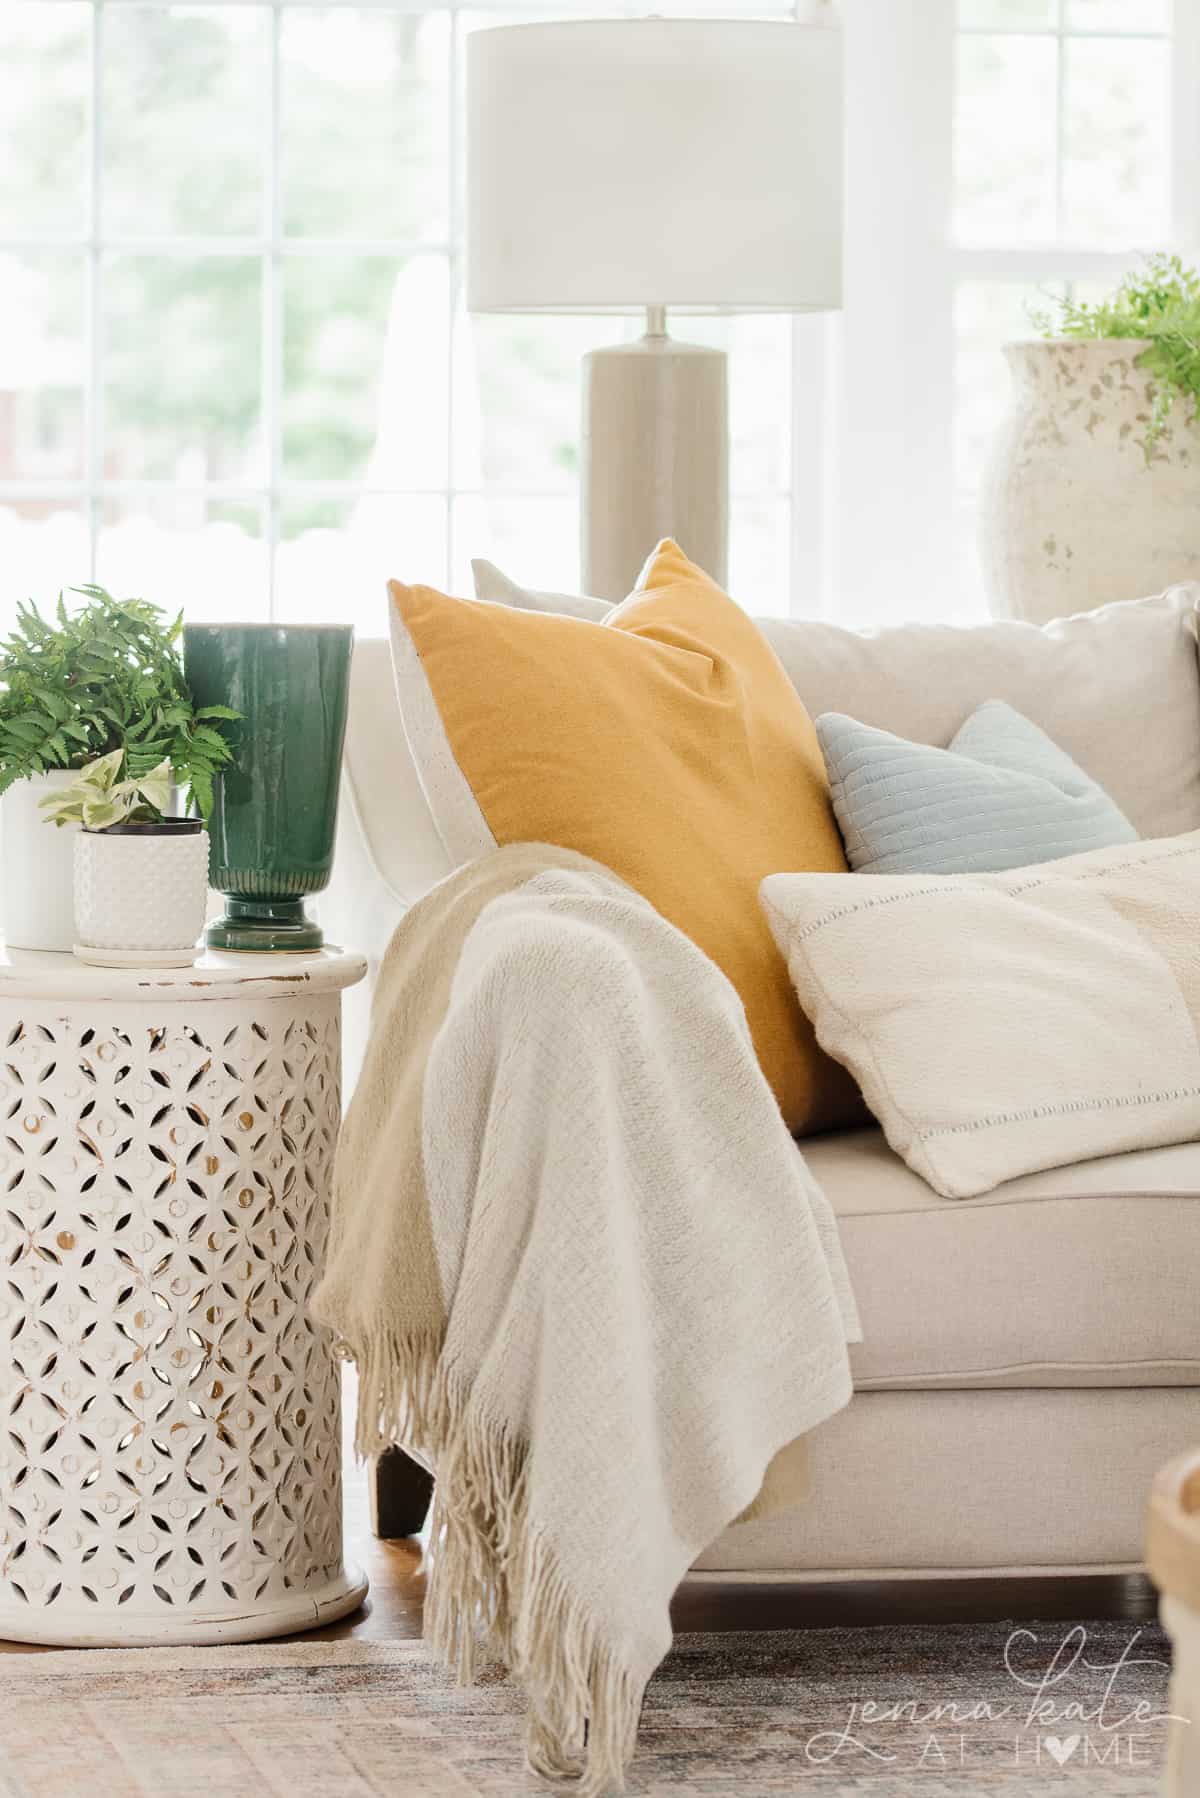 a close up of a yellow and light blue pillow arrangement on a living room sofa